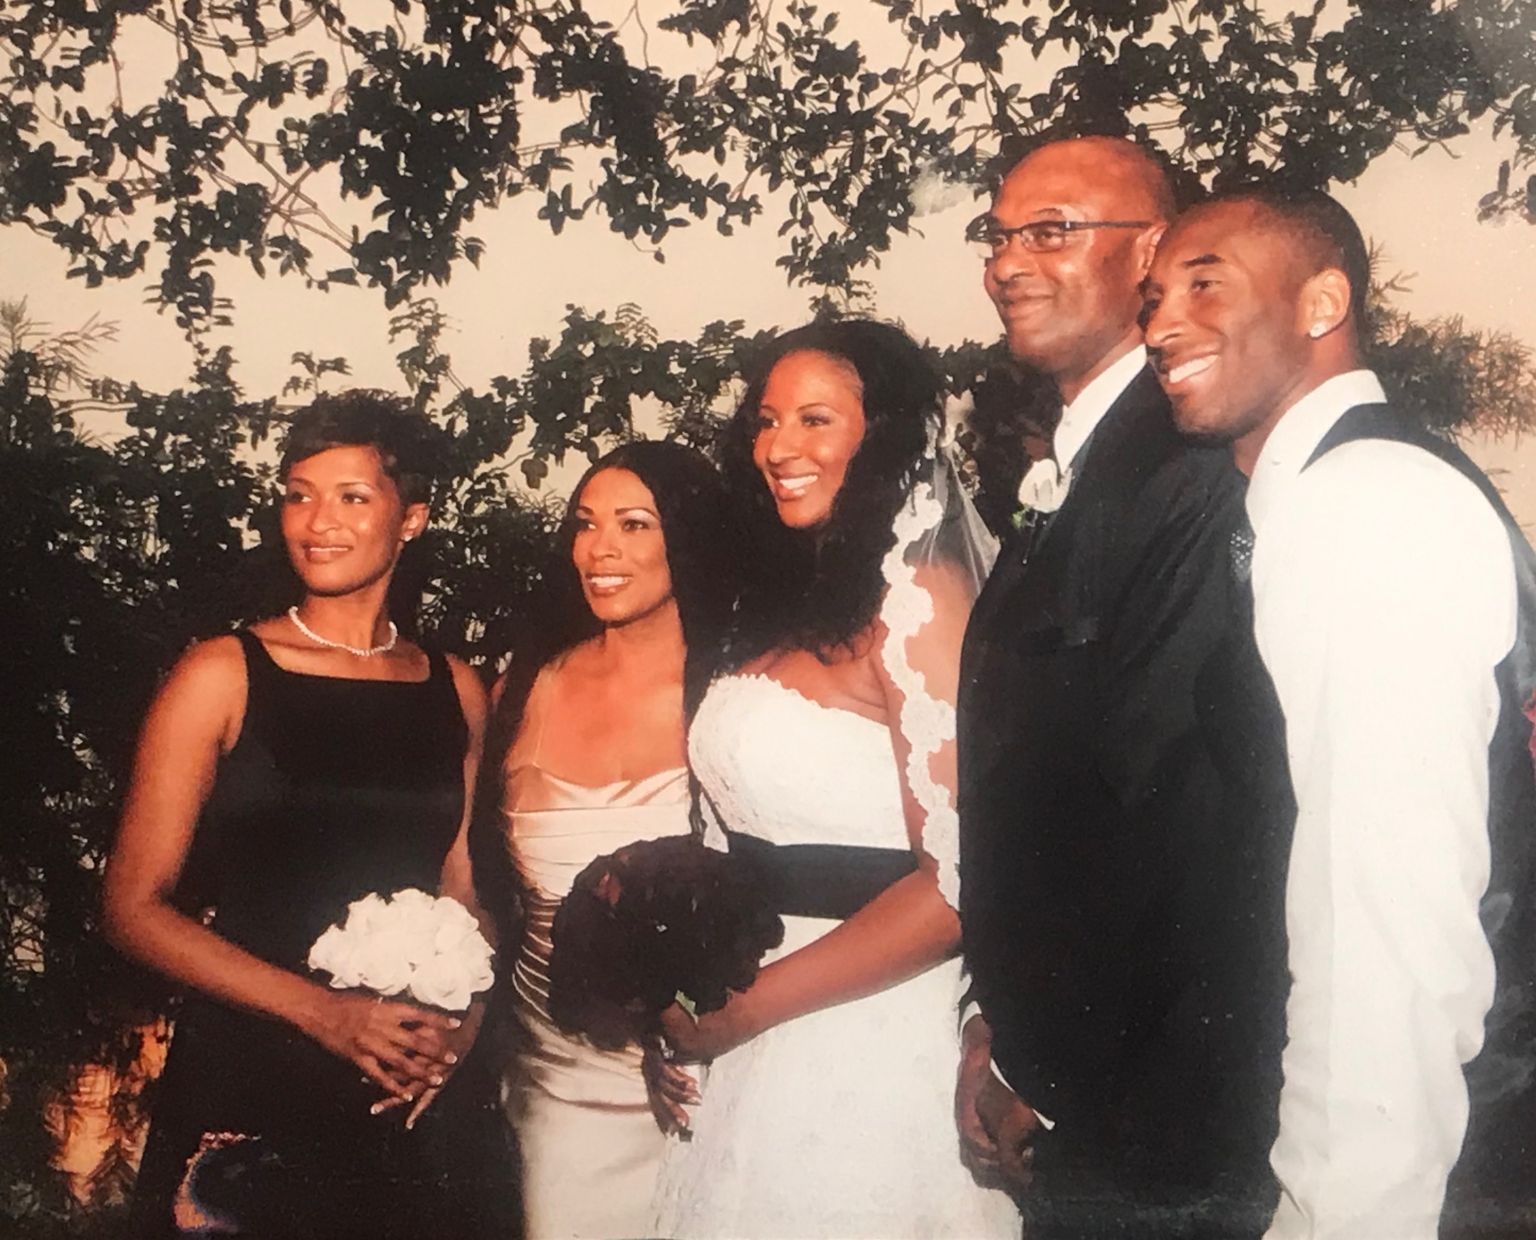 Kobe Bryant’s Sisters Say Their “Lives Are Forever Changed”